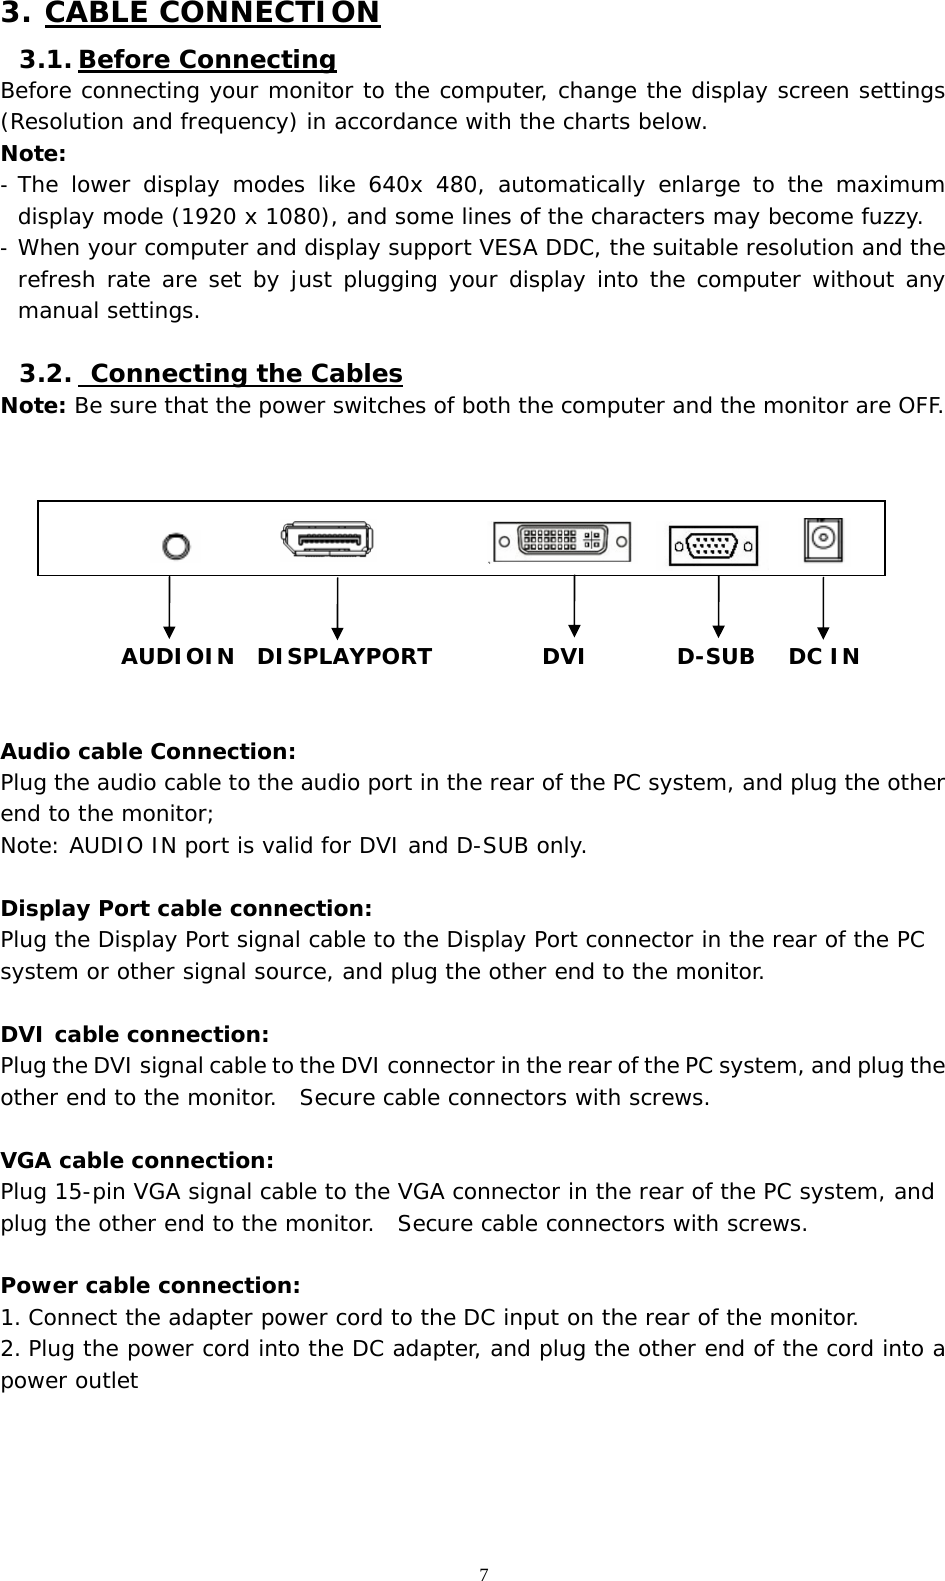   7 3. CABLE CONNECTION 3.1. Before Connecting Before connecting your monitor to the computer, change the display screen settings (Resolution and frequency) in accordance with the charts below.  Note: -  The lower display modes like 640x 480, automatically enlarge to the maximum display mode (1920 x 1080), and some lines of the characters may become fuzzy.  -  When your computer and display support VESA DDC, the suitable resolution and the refresh rate are set by just plugging your display into the computer without any manual settings.   3.2.  Connecting the Cables Note: Be sure that the power switches of both the computer and the monitor are OFF.                          AUDIOIN  DISPLAYPORT          DVI        D-SUB   DC IN   Audio cable Connection: Plug the audio cable to the audio port in the rear of the PC system, and plug the other end to the monitor;  Note: AUDIO IN port is valid for DVI and D-SUB only.    Display Port cable connection: Plug the Display Port signal cable to the Display Port connector in the rear of the PC system or other signal source, and plug the other end to the monitor.    DVI cable connection: Plug the DVI signal cable to the DVI connector in the rear of the PC system, and plug the other end to the monitor.  Secure cable connectors with screws.  VGA cable connection: Plug 15-pin VGA signal cable to the VGA connector in the rear of the PC system, and plug the other end to the monitor.  Secure cable connectors with screws.  Power cable connection: 1. Connect the adapter power cord to the DC input on the rear of the monitor. 2. Plug the power cord into the DC adapter, and plug the other end of the cord into a power outlet     